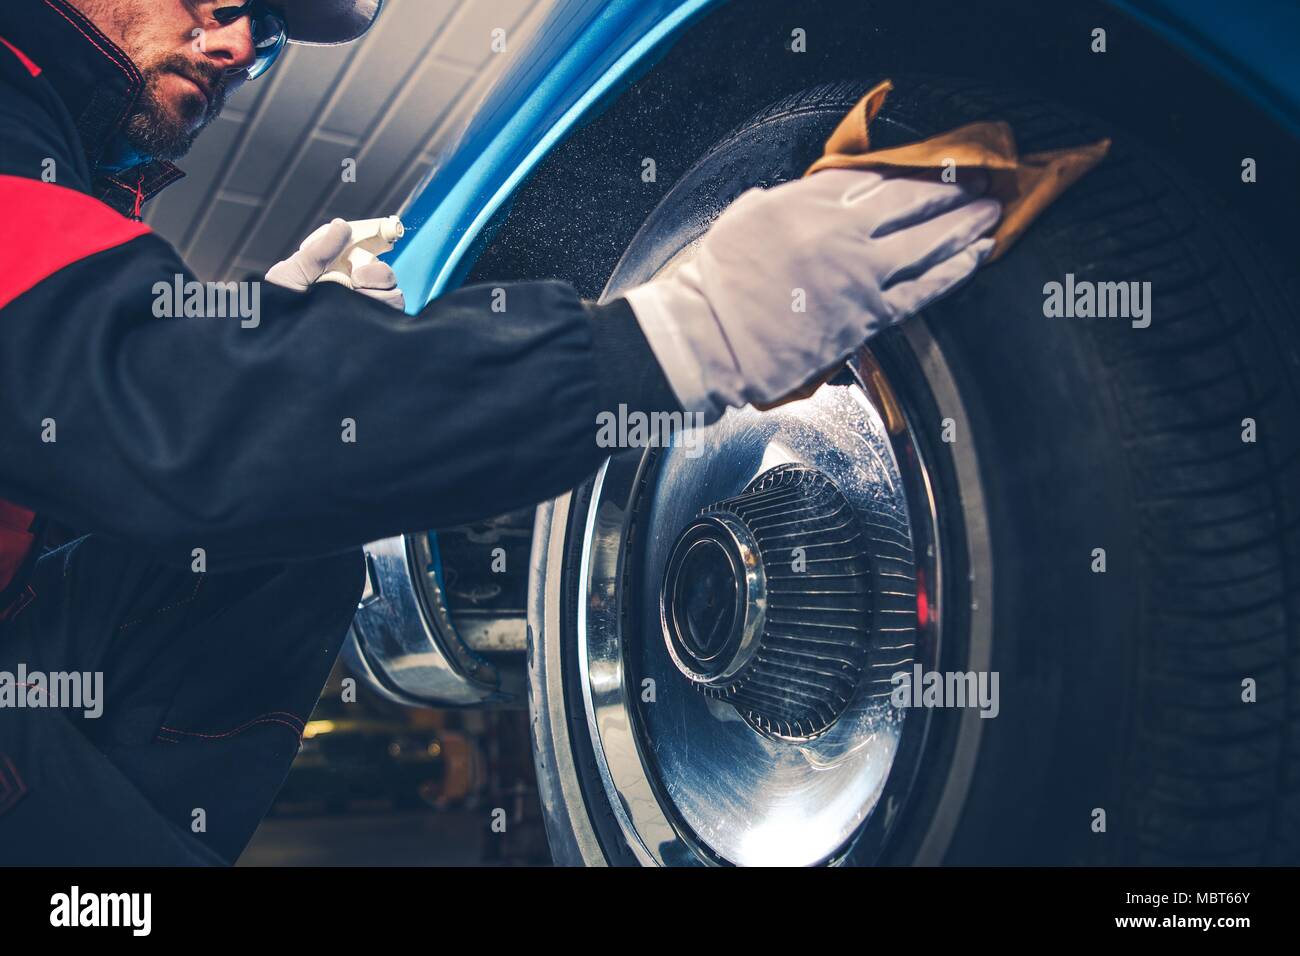 Caucasian Collector Taking Care of His American Classic Car. Chromed Wheels Cleaning. Stock Photo